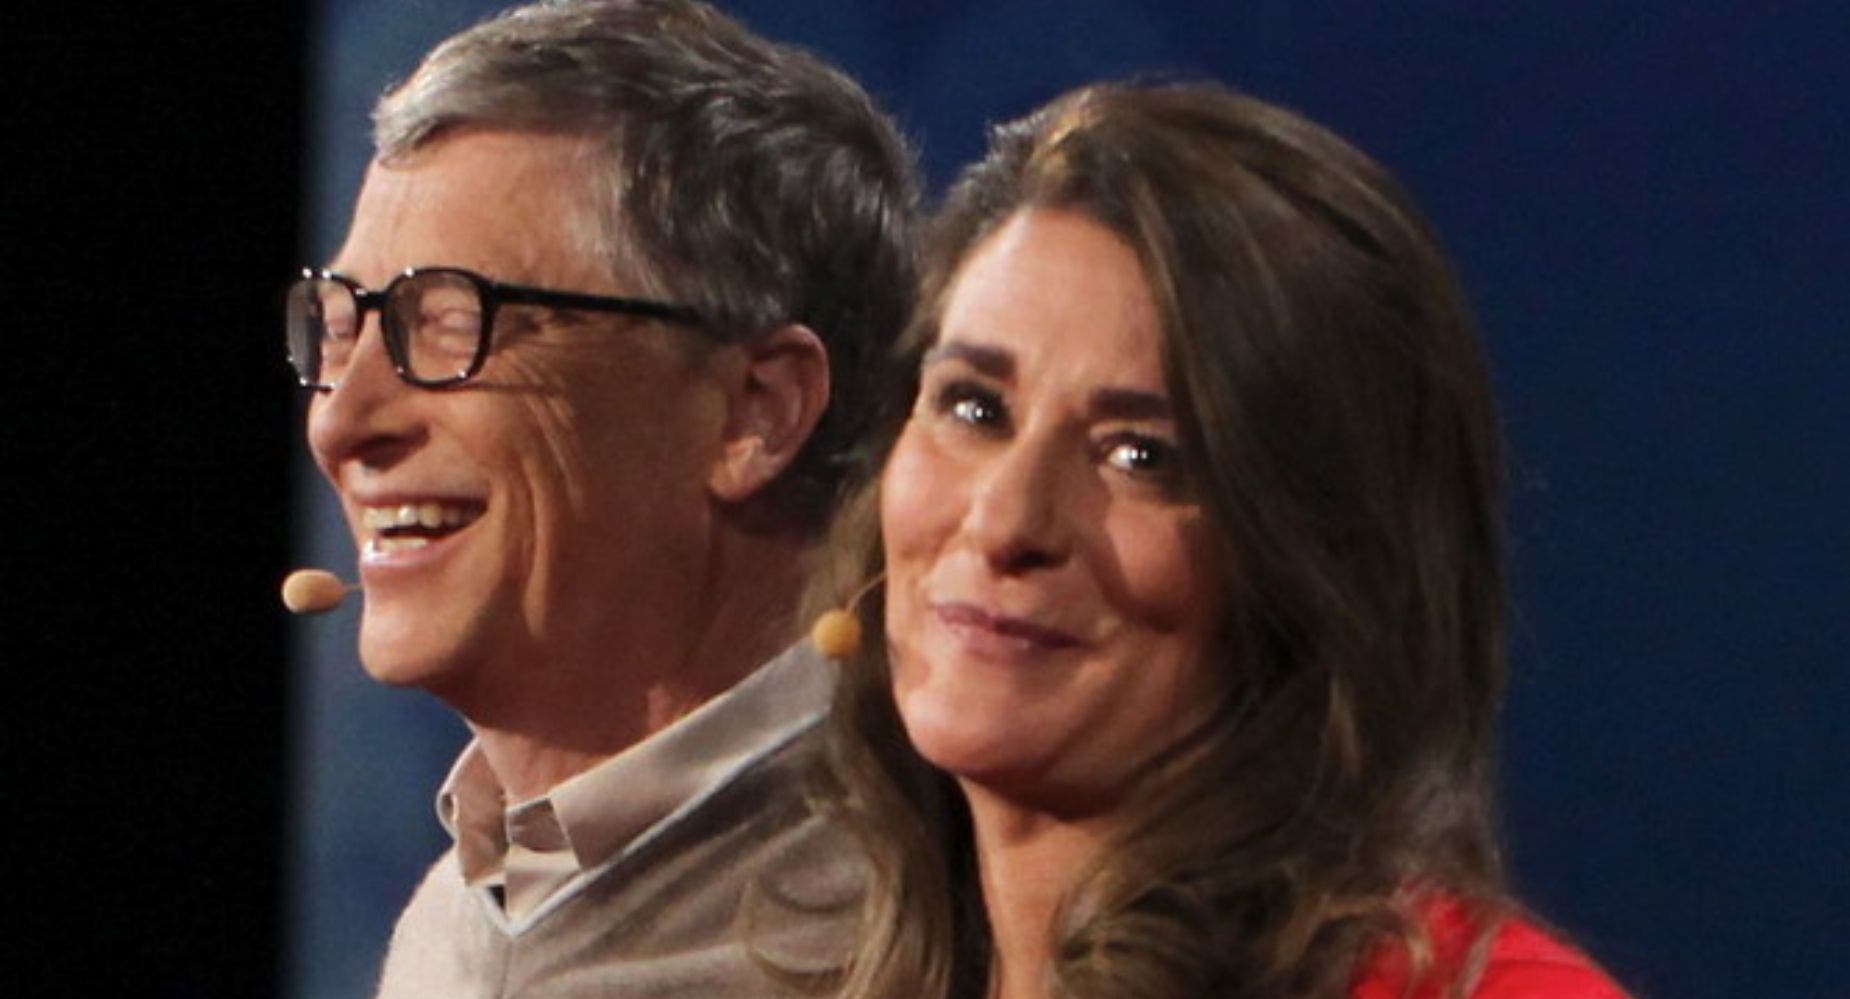 Melinda Gates Reveals 'The Most Difficult Times' During Divorce With Microsoft Co-Founder: 'There's Sadness'